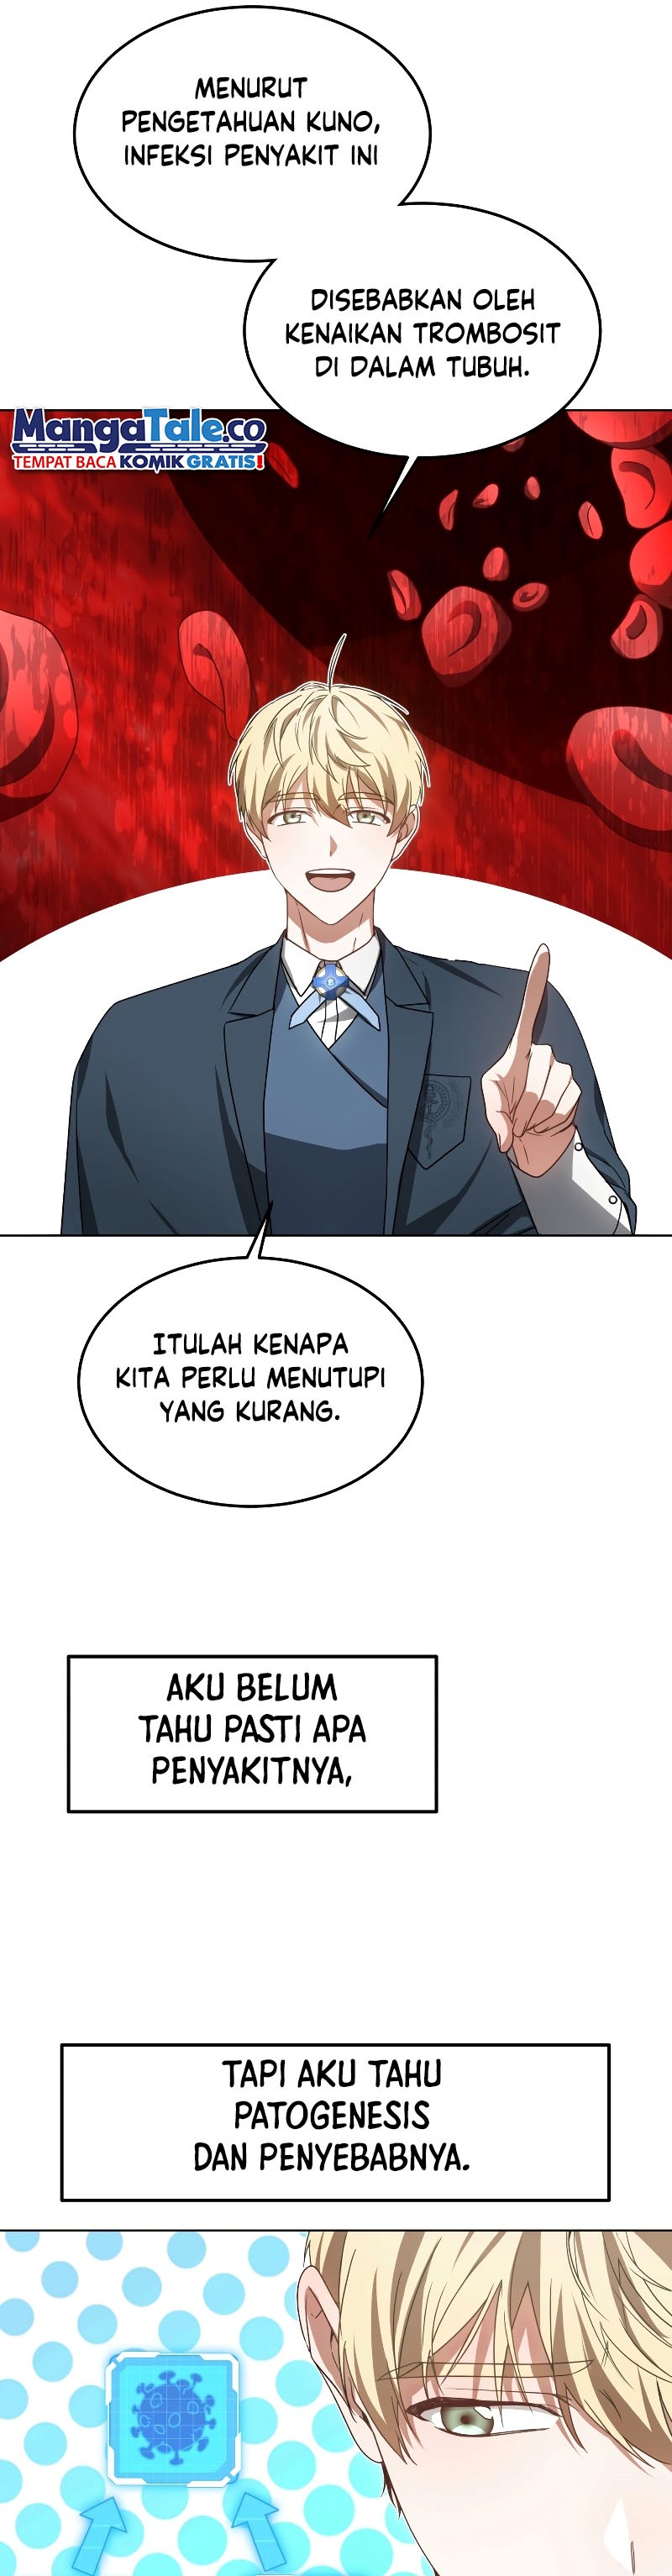 Dr. Player Chapter 37